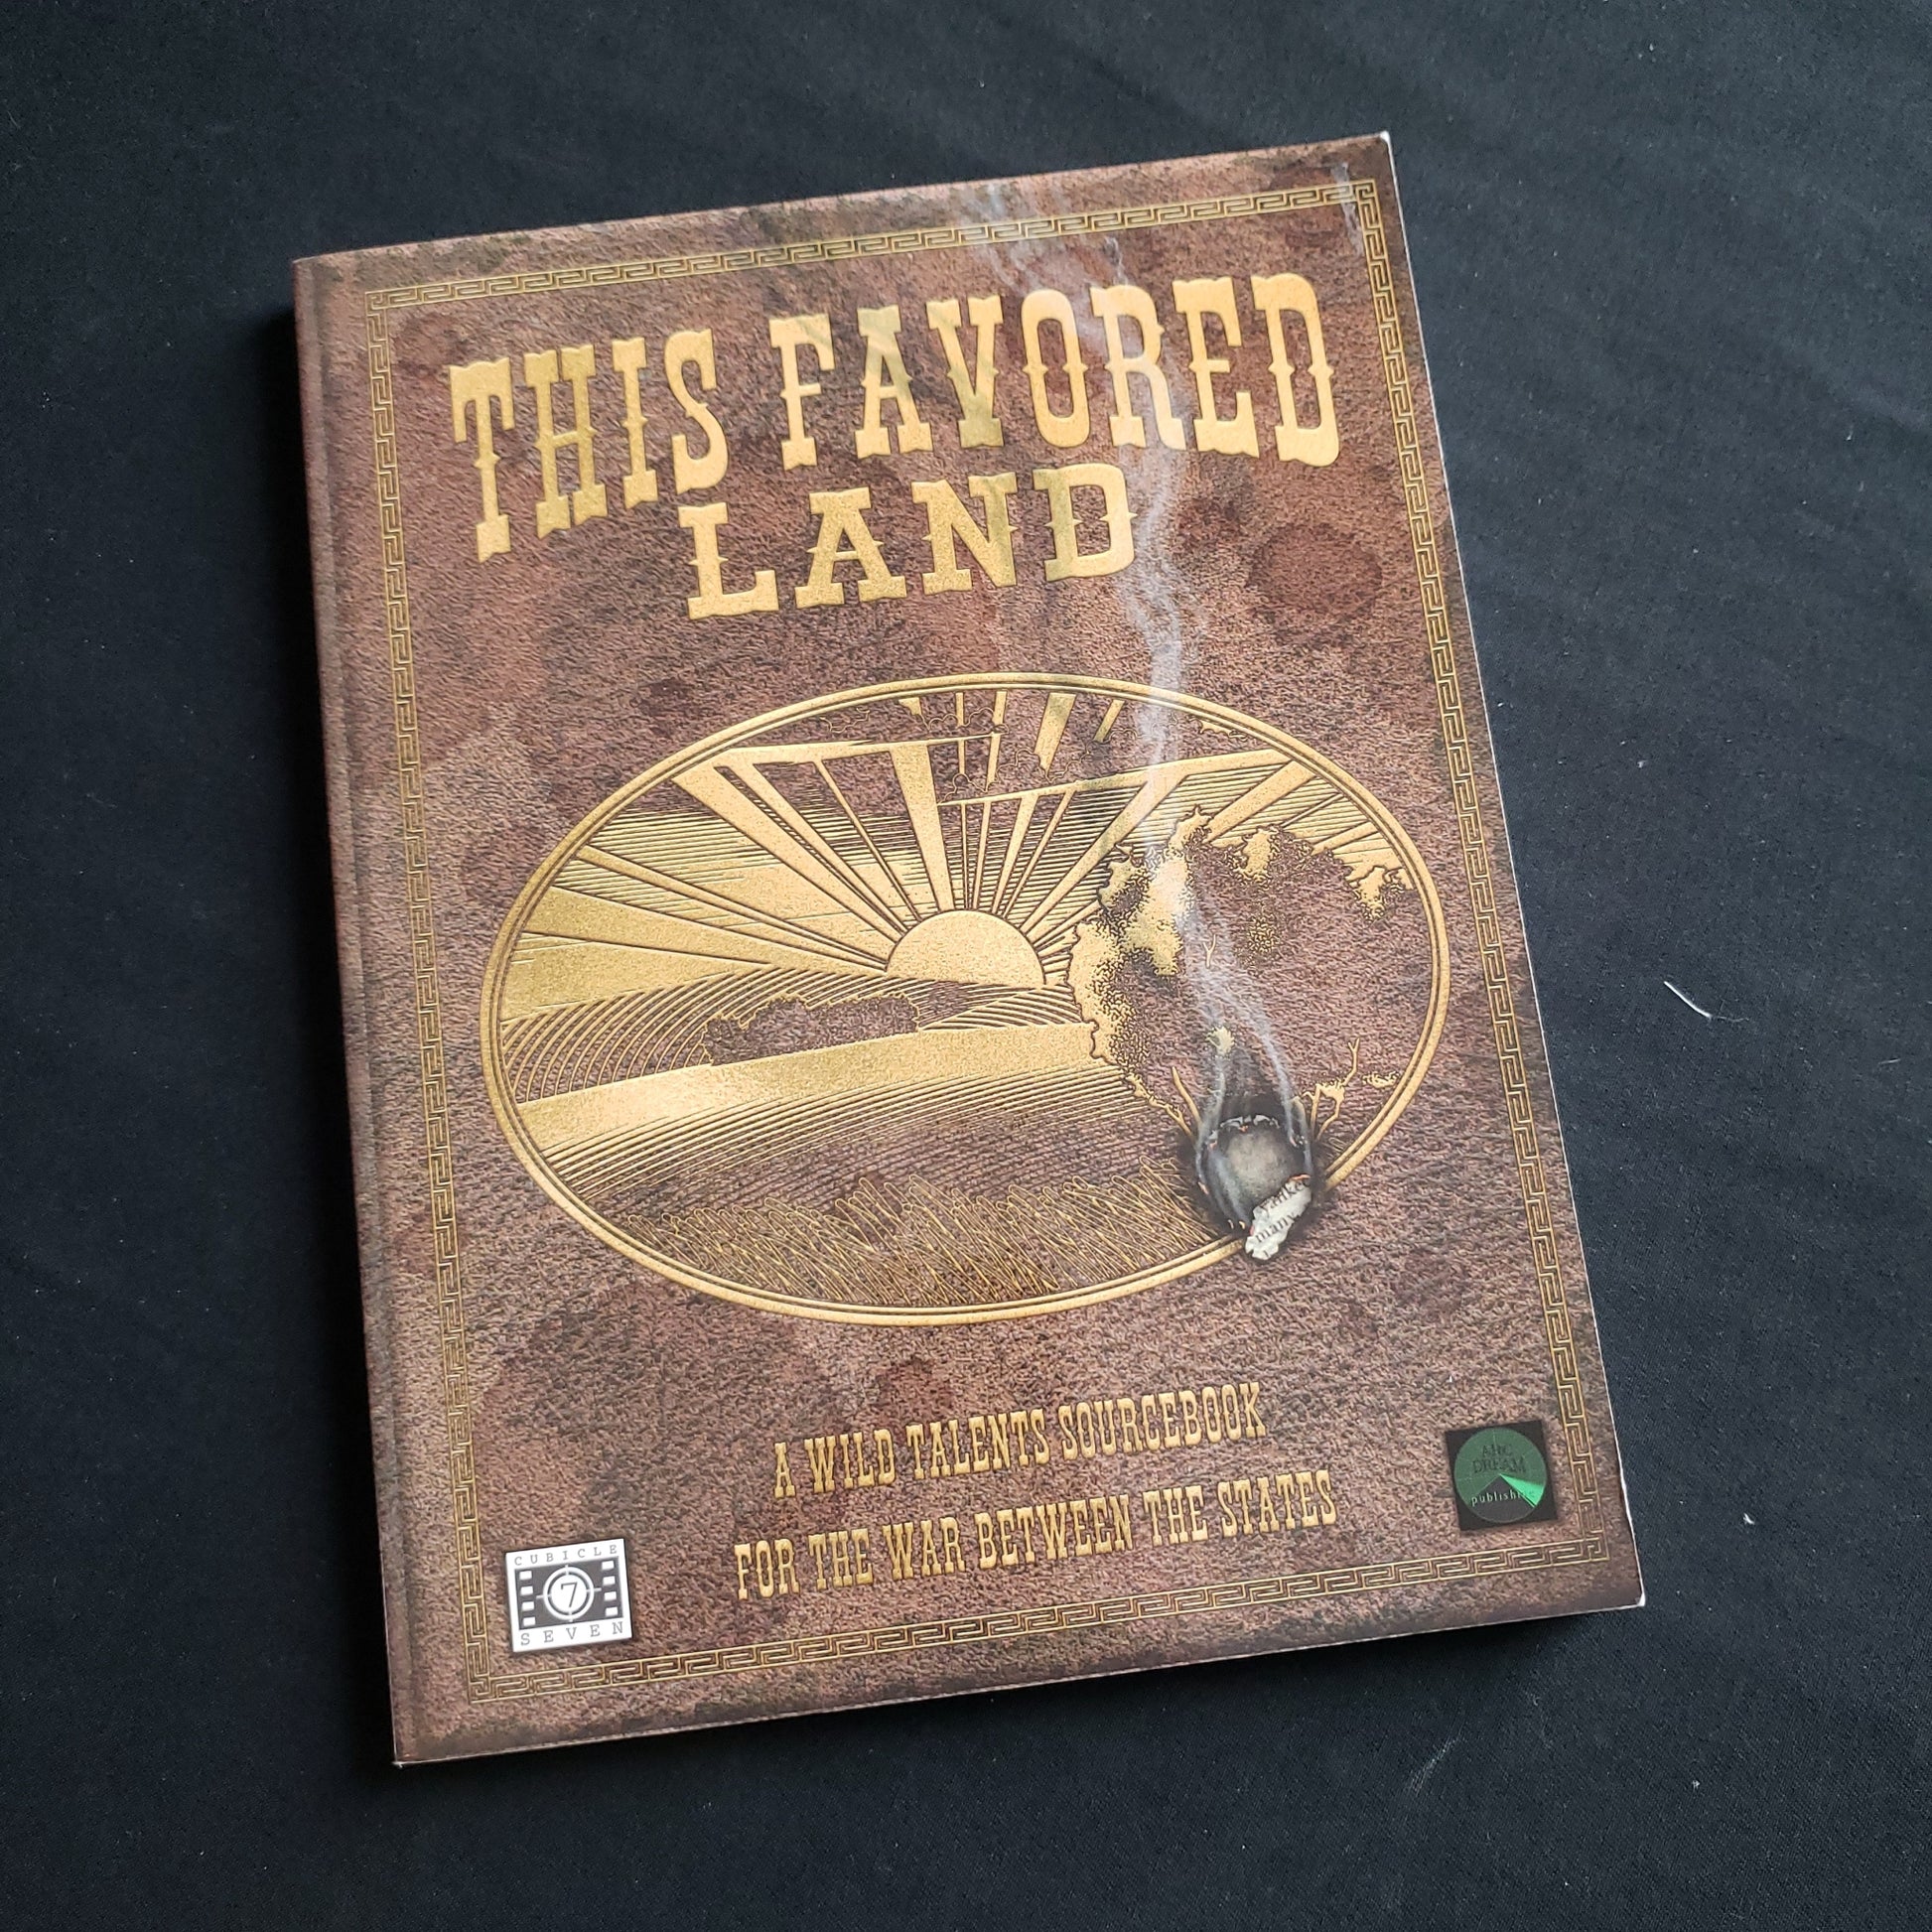 Image shows the front cover of the This Favored Land book for the Wild Talents roleplaying game